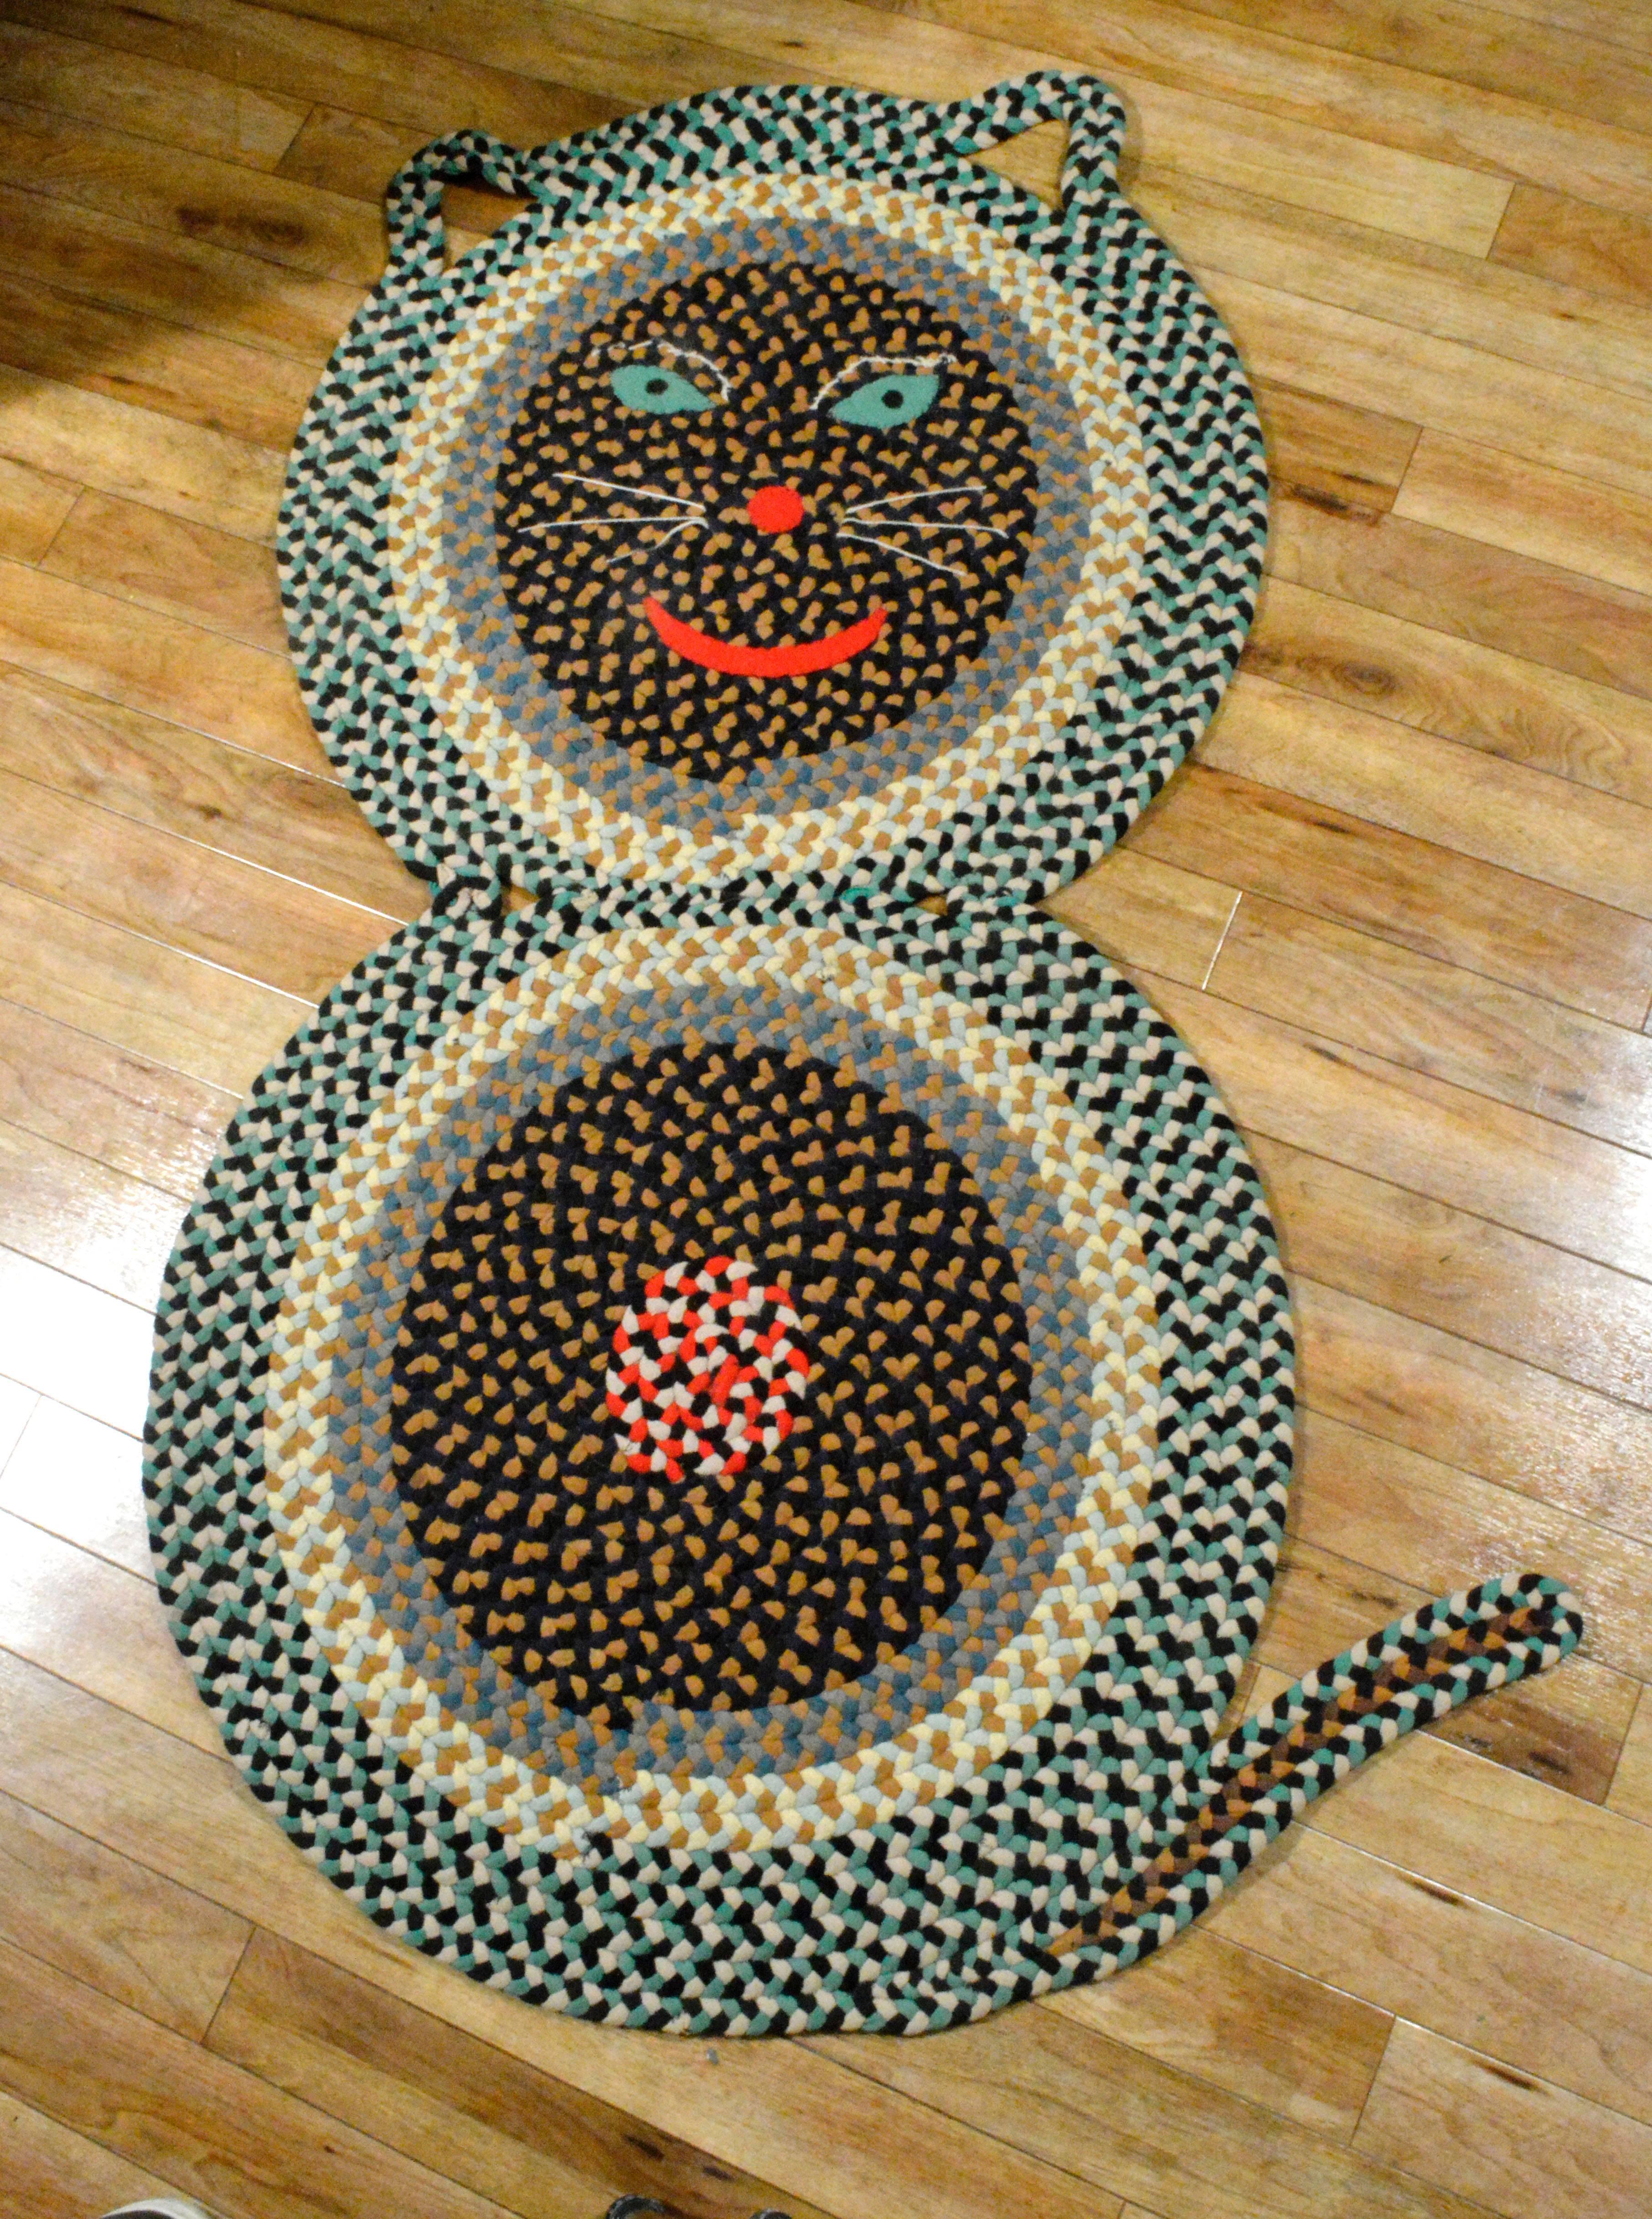 The American Cat braided rug is of a large size and incredibly fun and was most likely made in Pennsylvania in the 1940's
1940's.